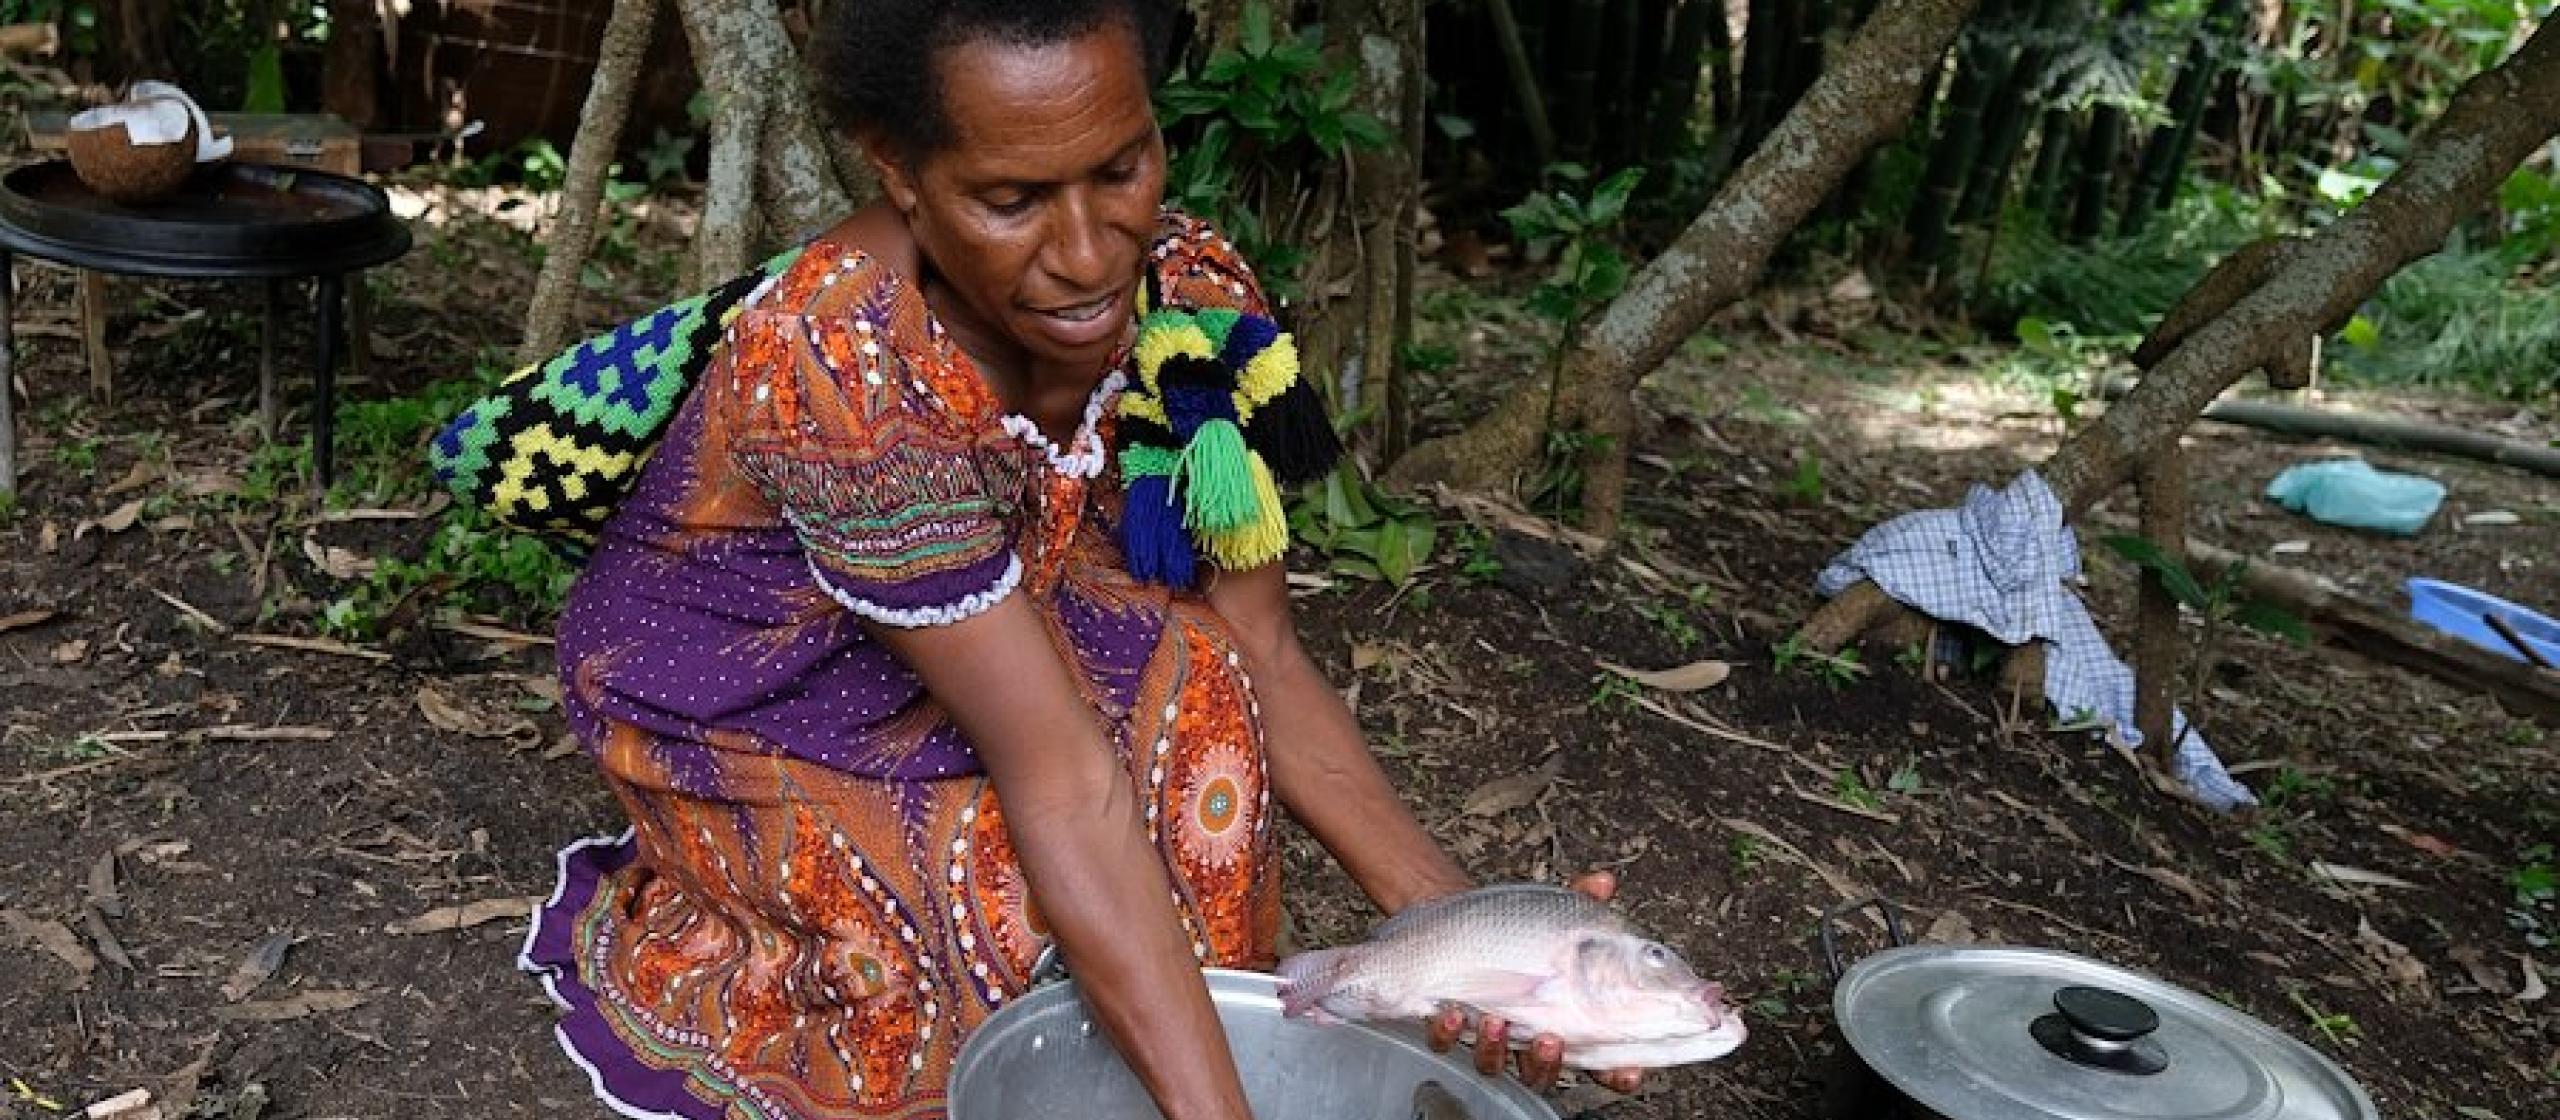 A woman cleans freshly caught fish